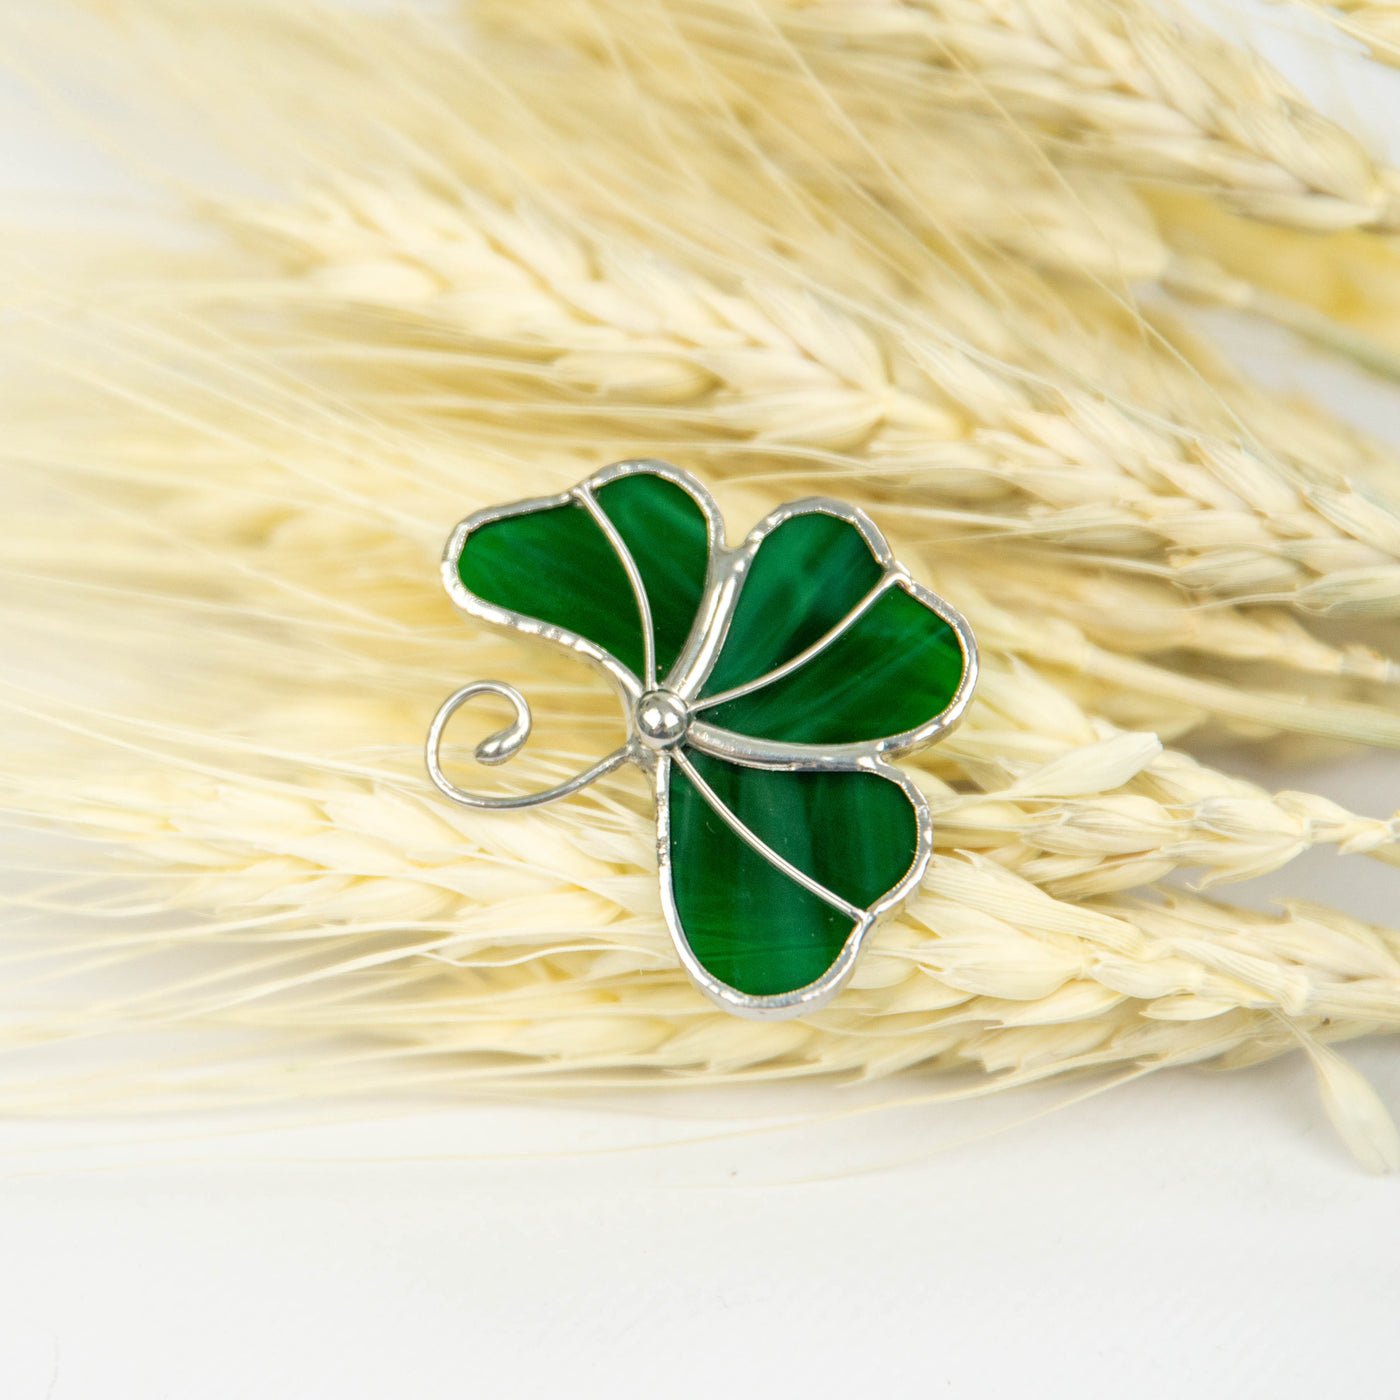 Three leaf clover brooch of stained glass